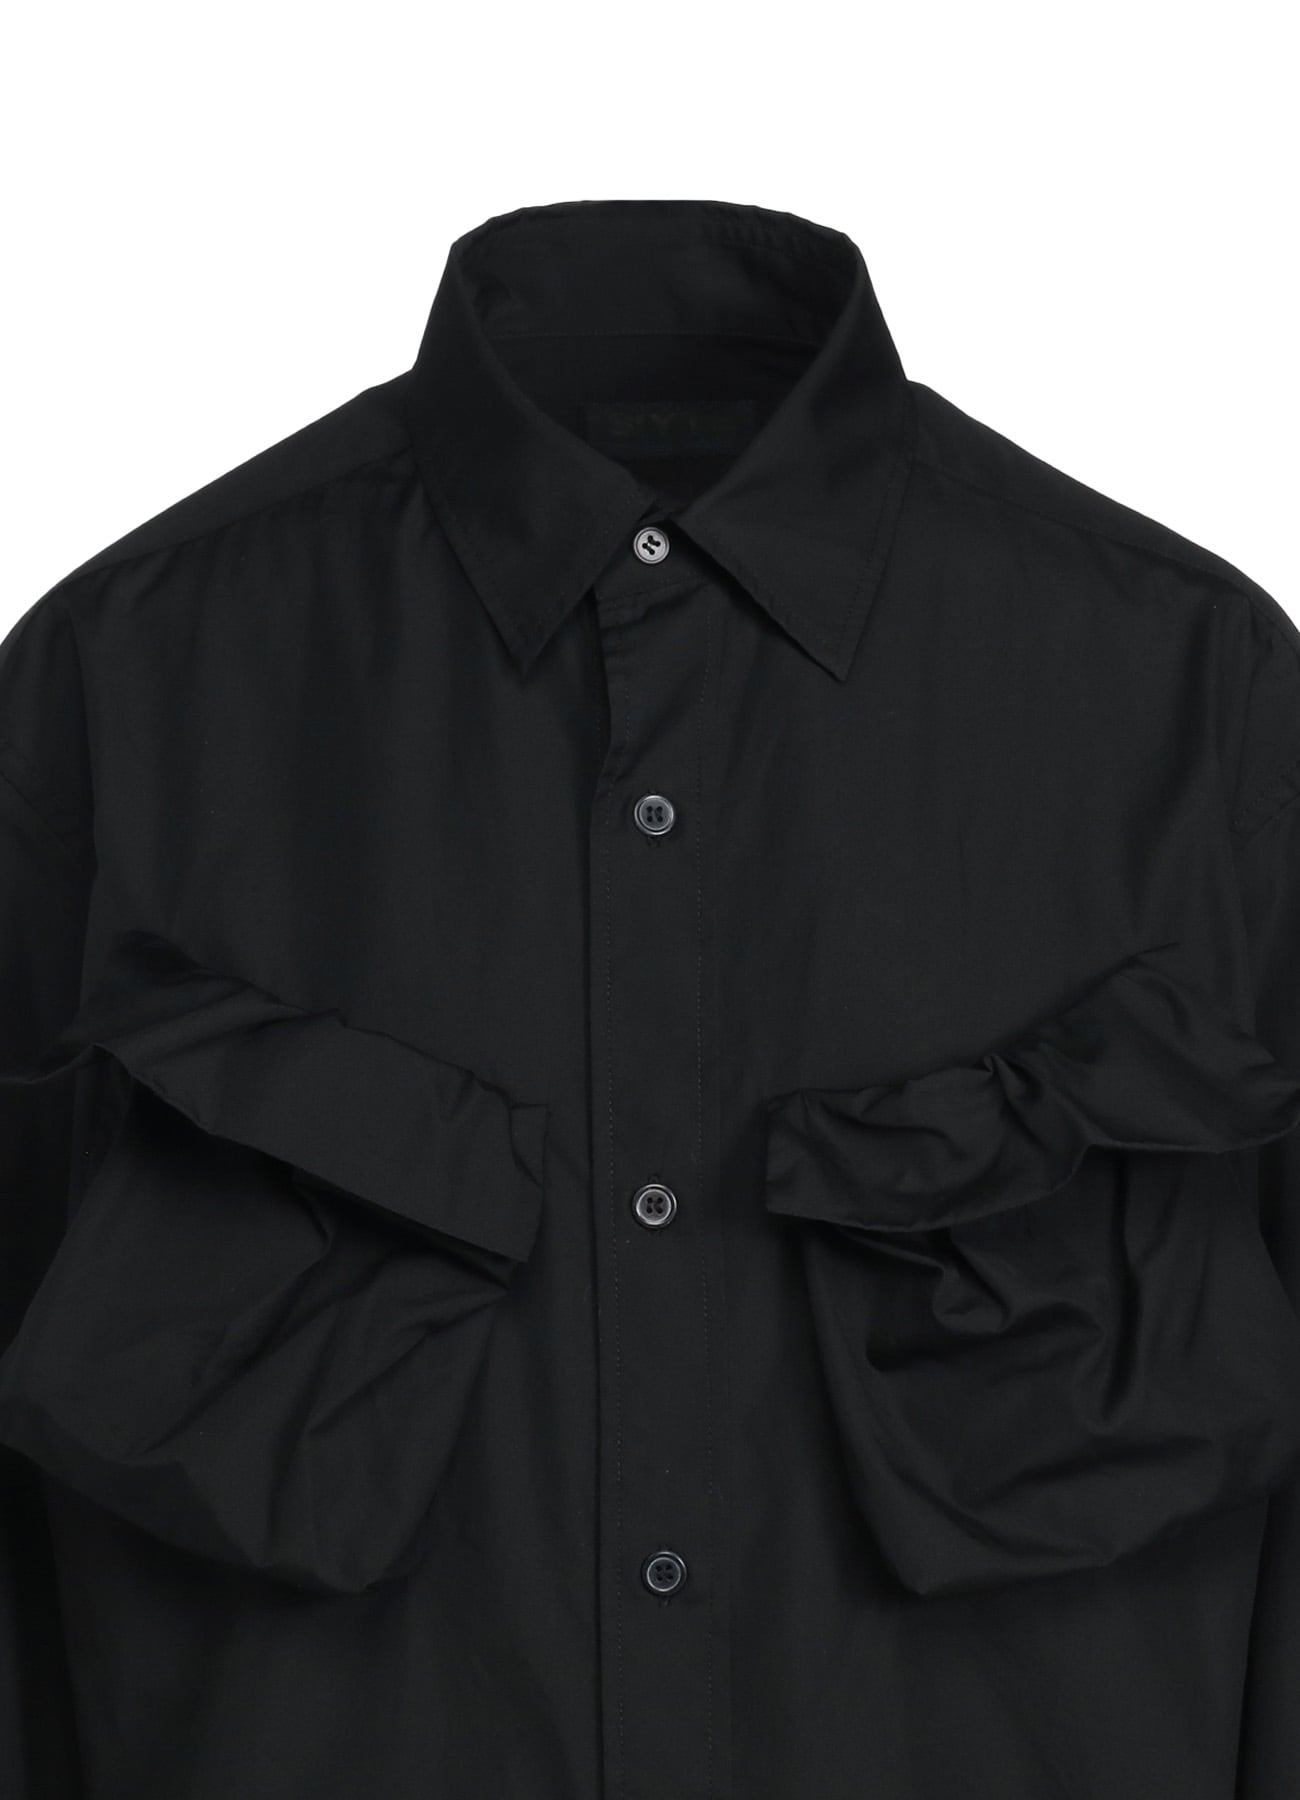 COTTON BROAD CLOTH DECONSTRUCTED CHEST POCKETS SHIRT(S Black): S 